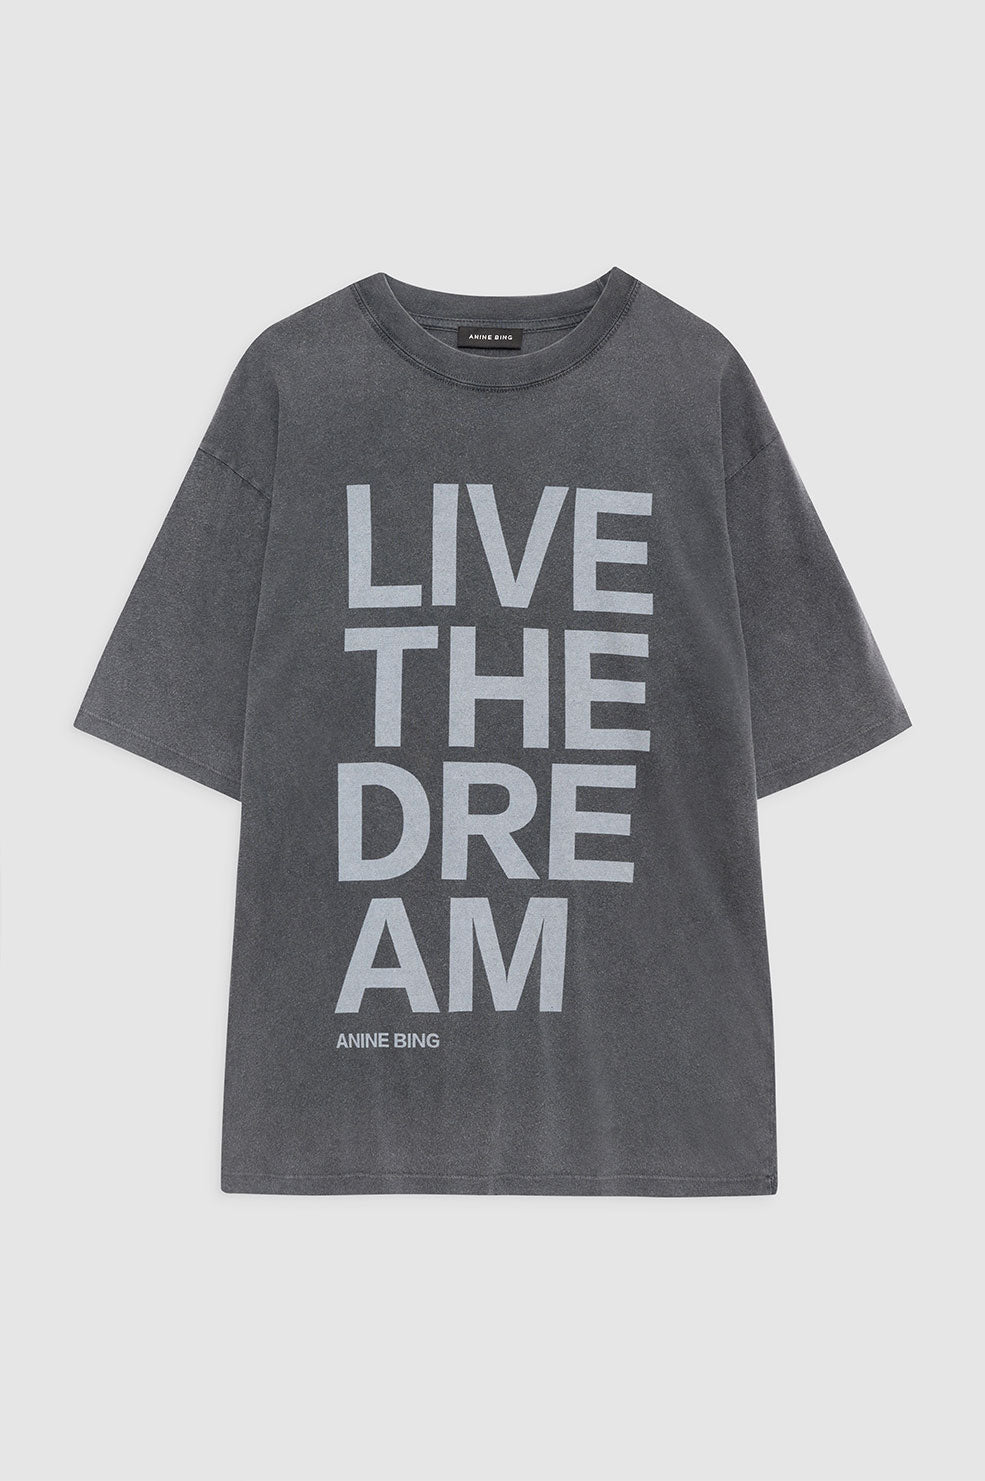 ANINE BING Cason Tee Live The Dream - Washed Black - Front View